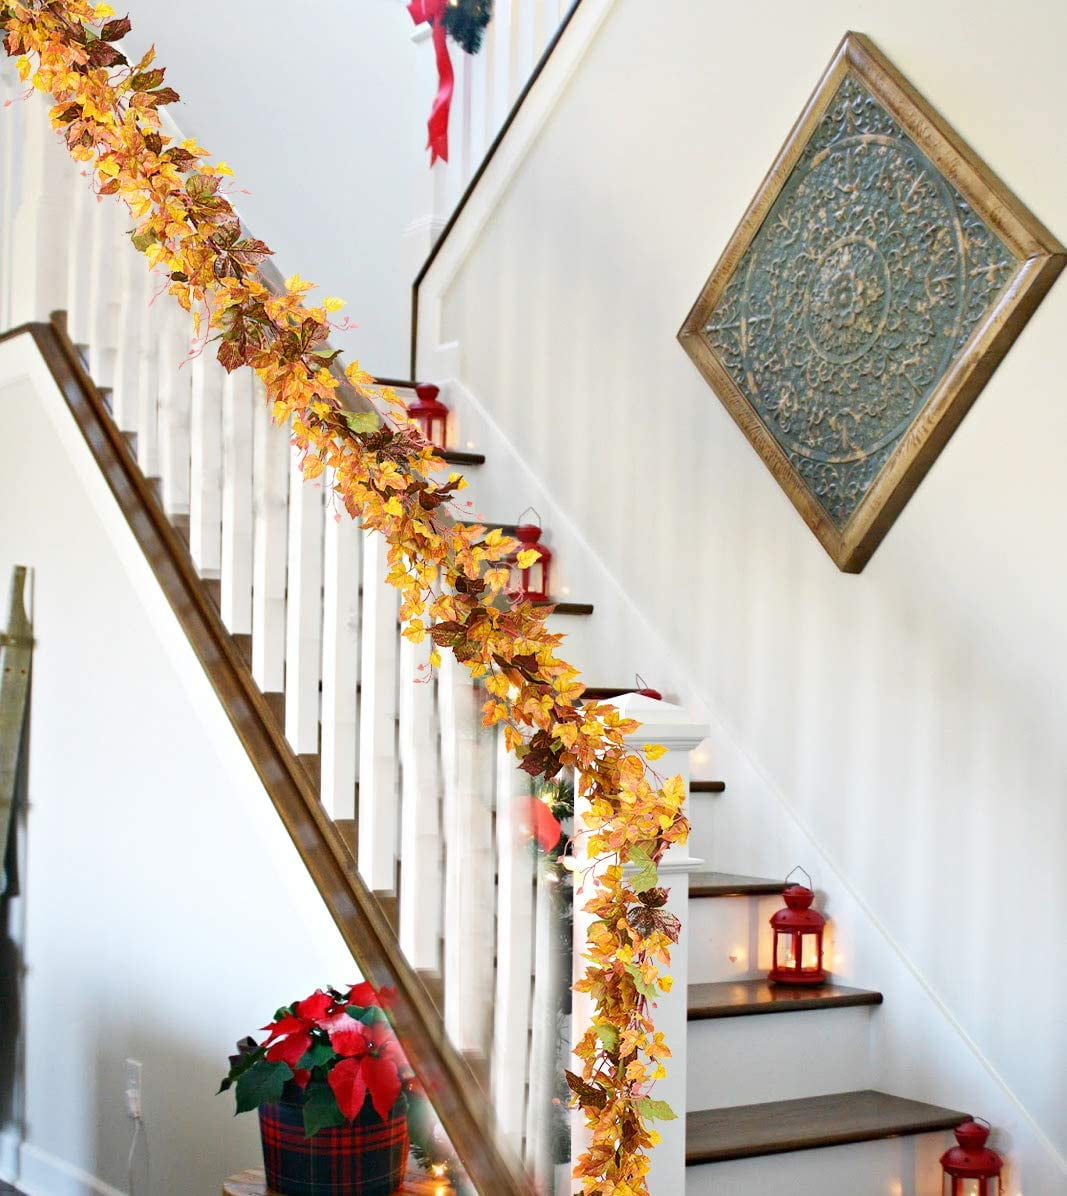 6Ft/Pc Artificial Autumn Garland Foliage Garland Thanksgiving Decor for Home Wedding Fireplace Doorway Fireplace Christmas 2 Pack Fall Garland Maple Leaf Garland